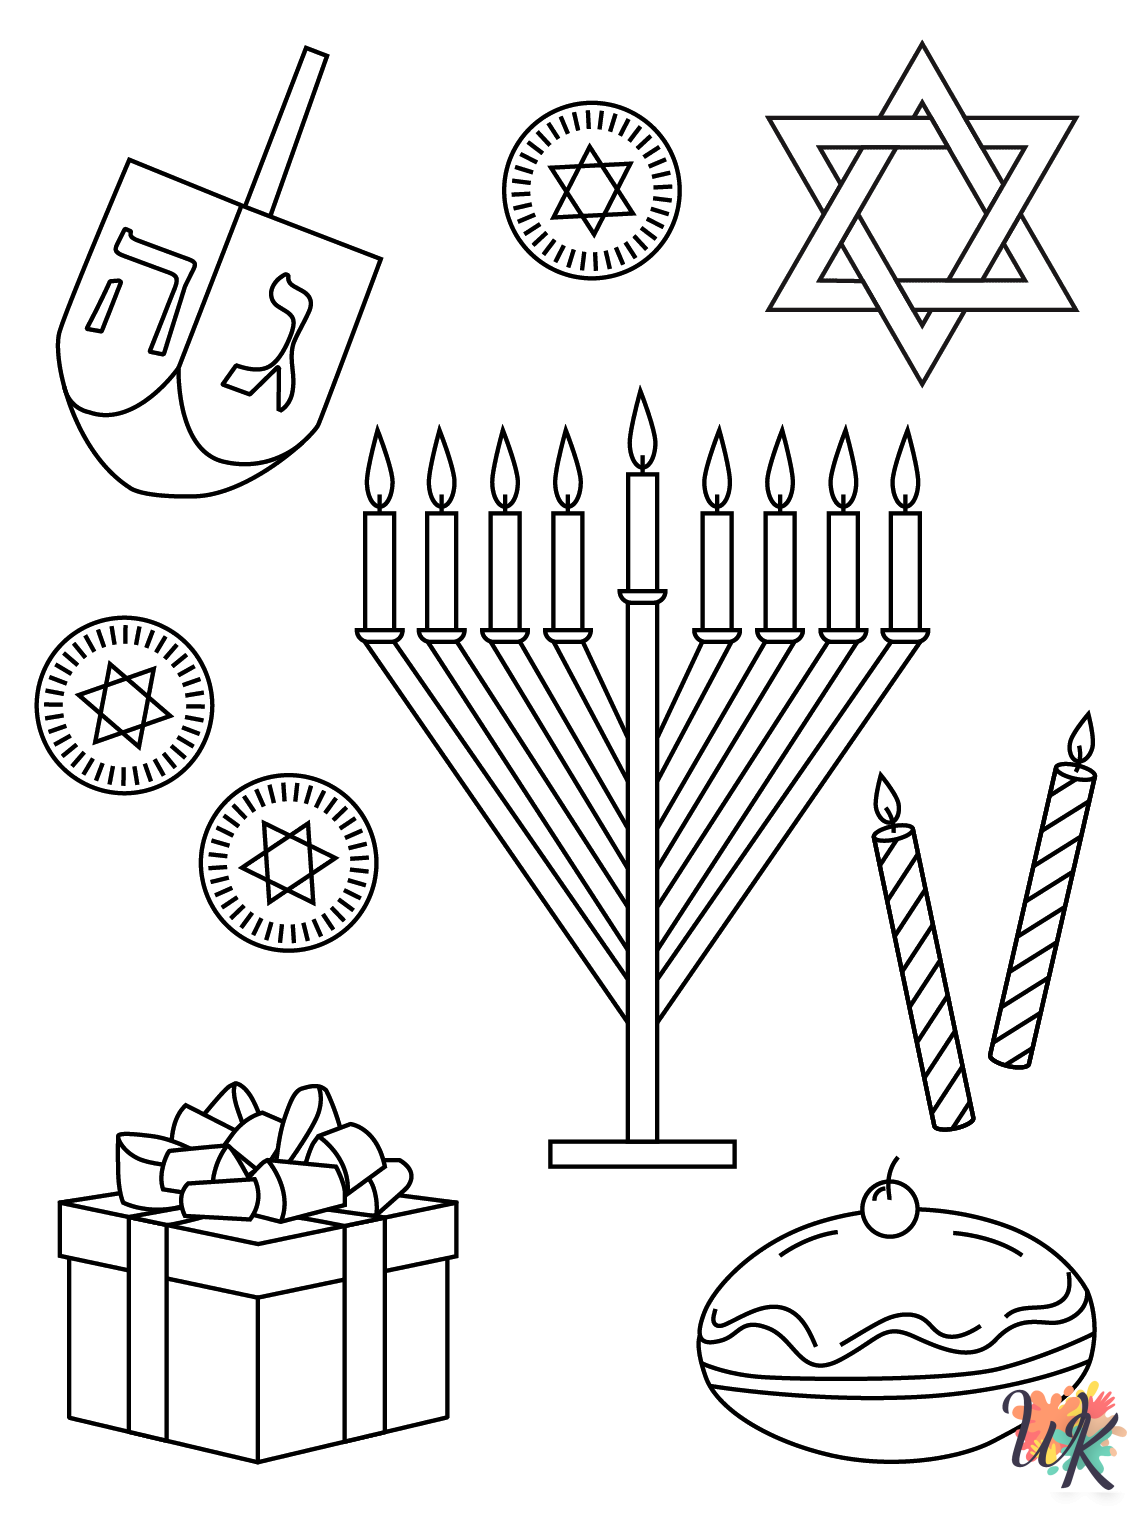 easy Hanukkah coloring pages